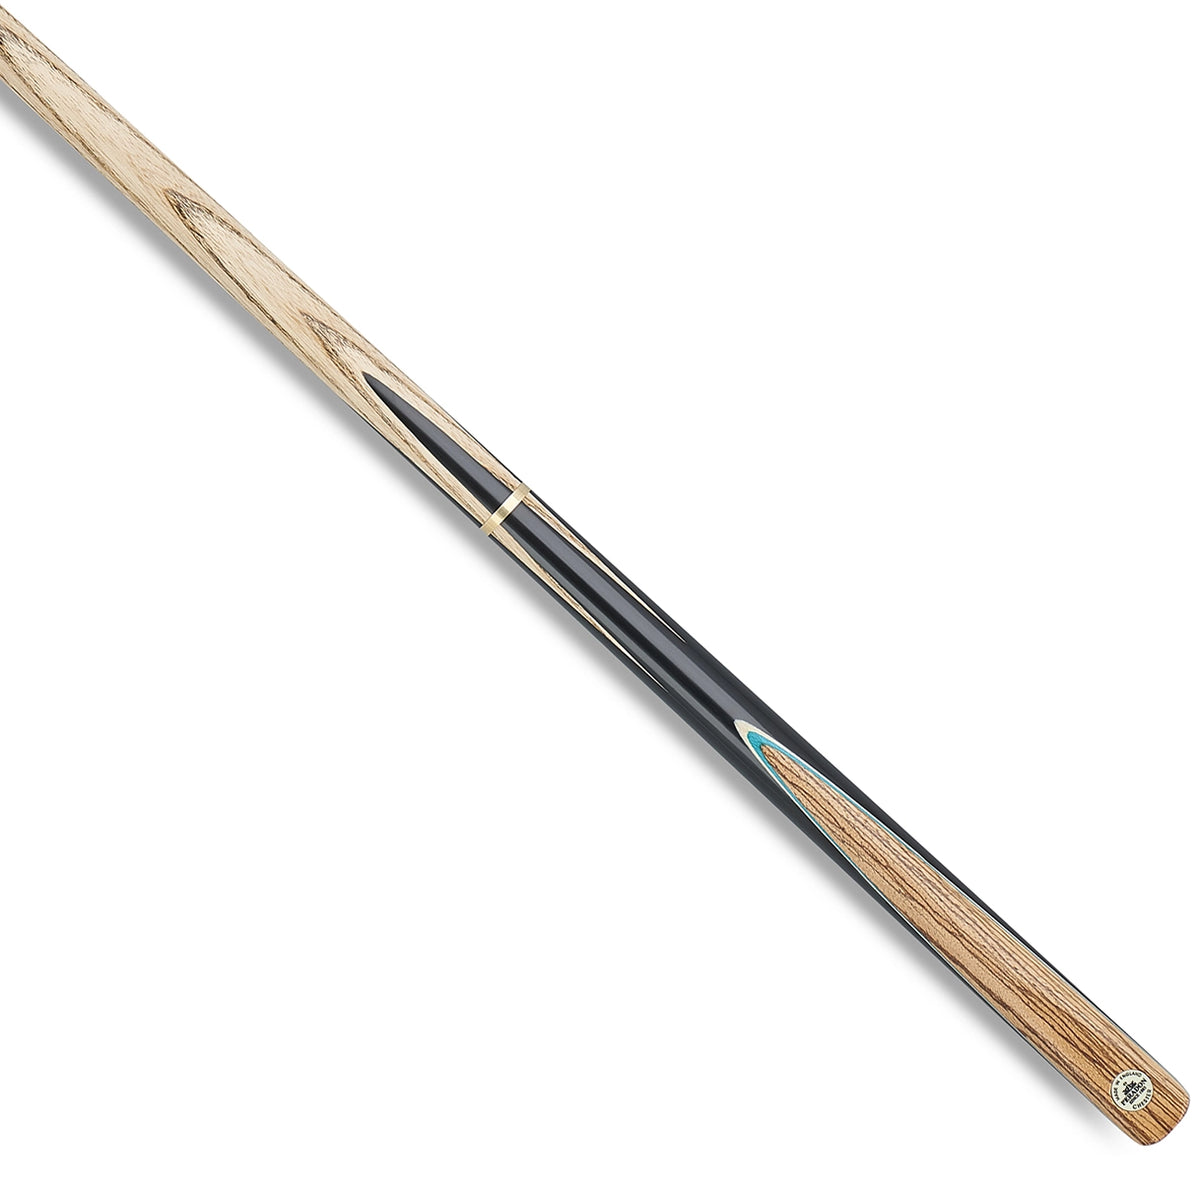 Peradon Chester 3/4 Jointed Snooker Cue. On angle view